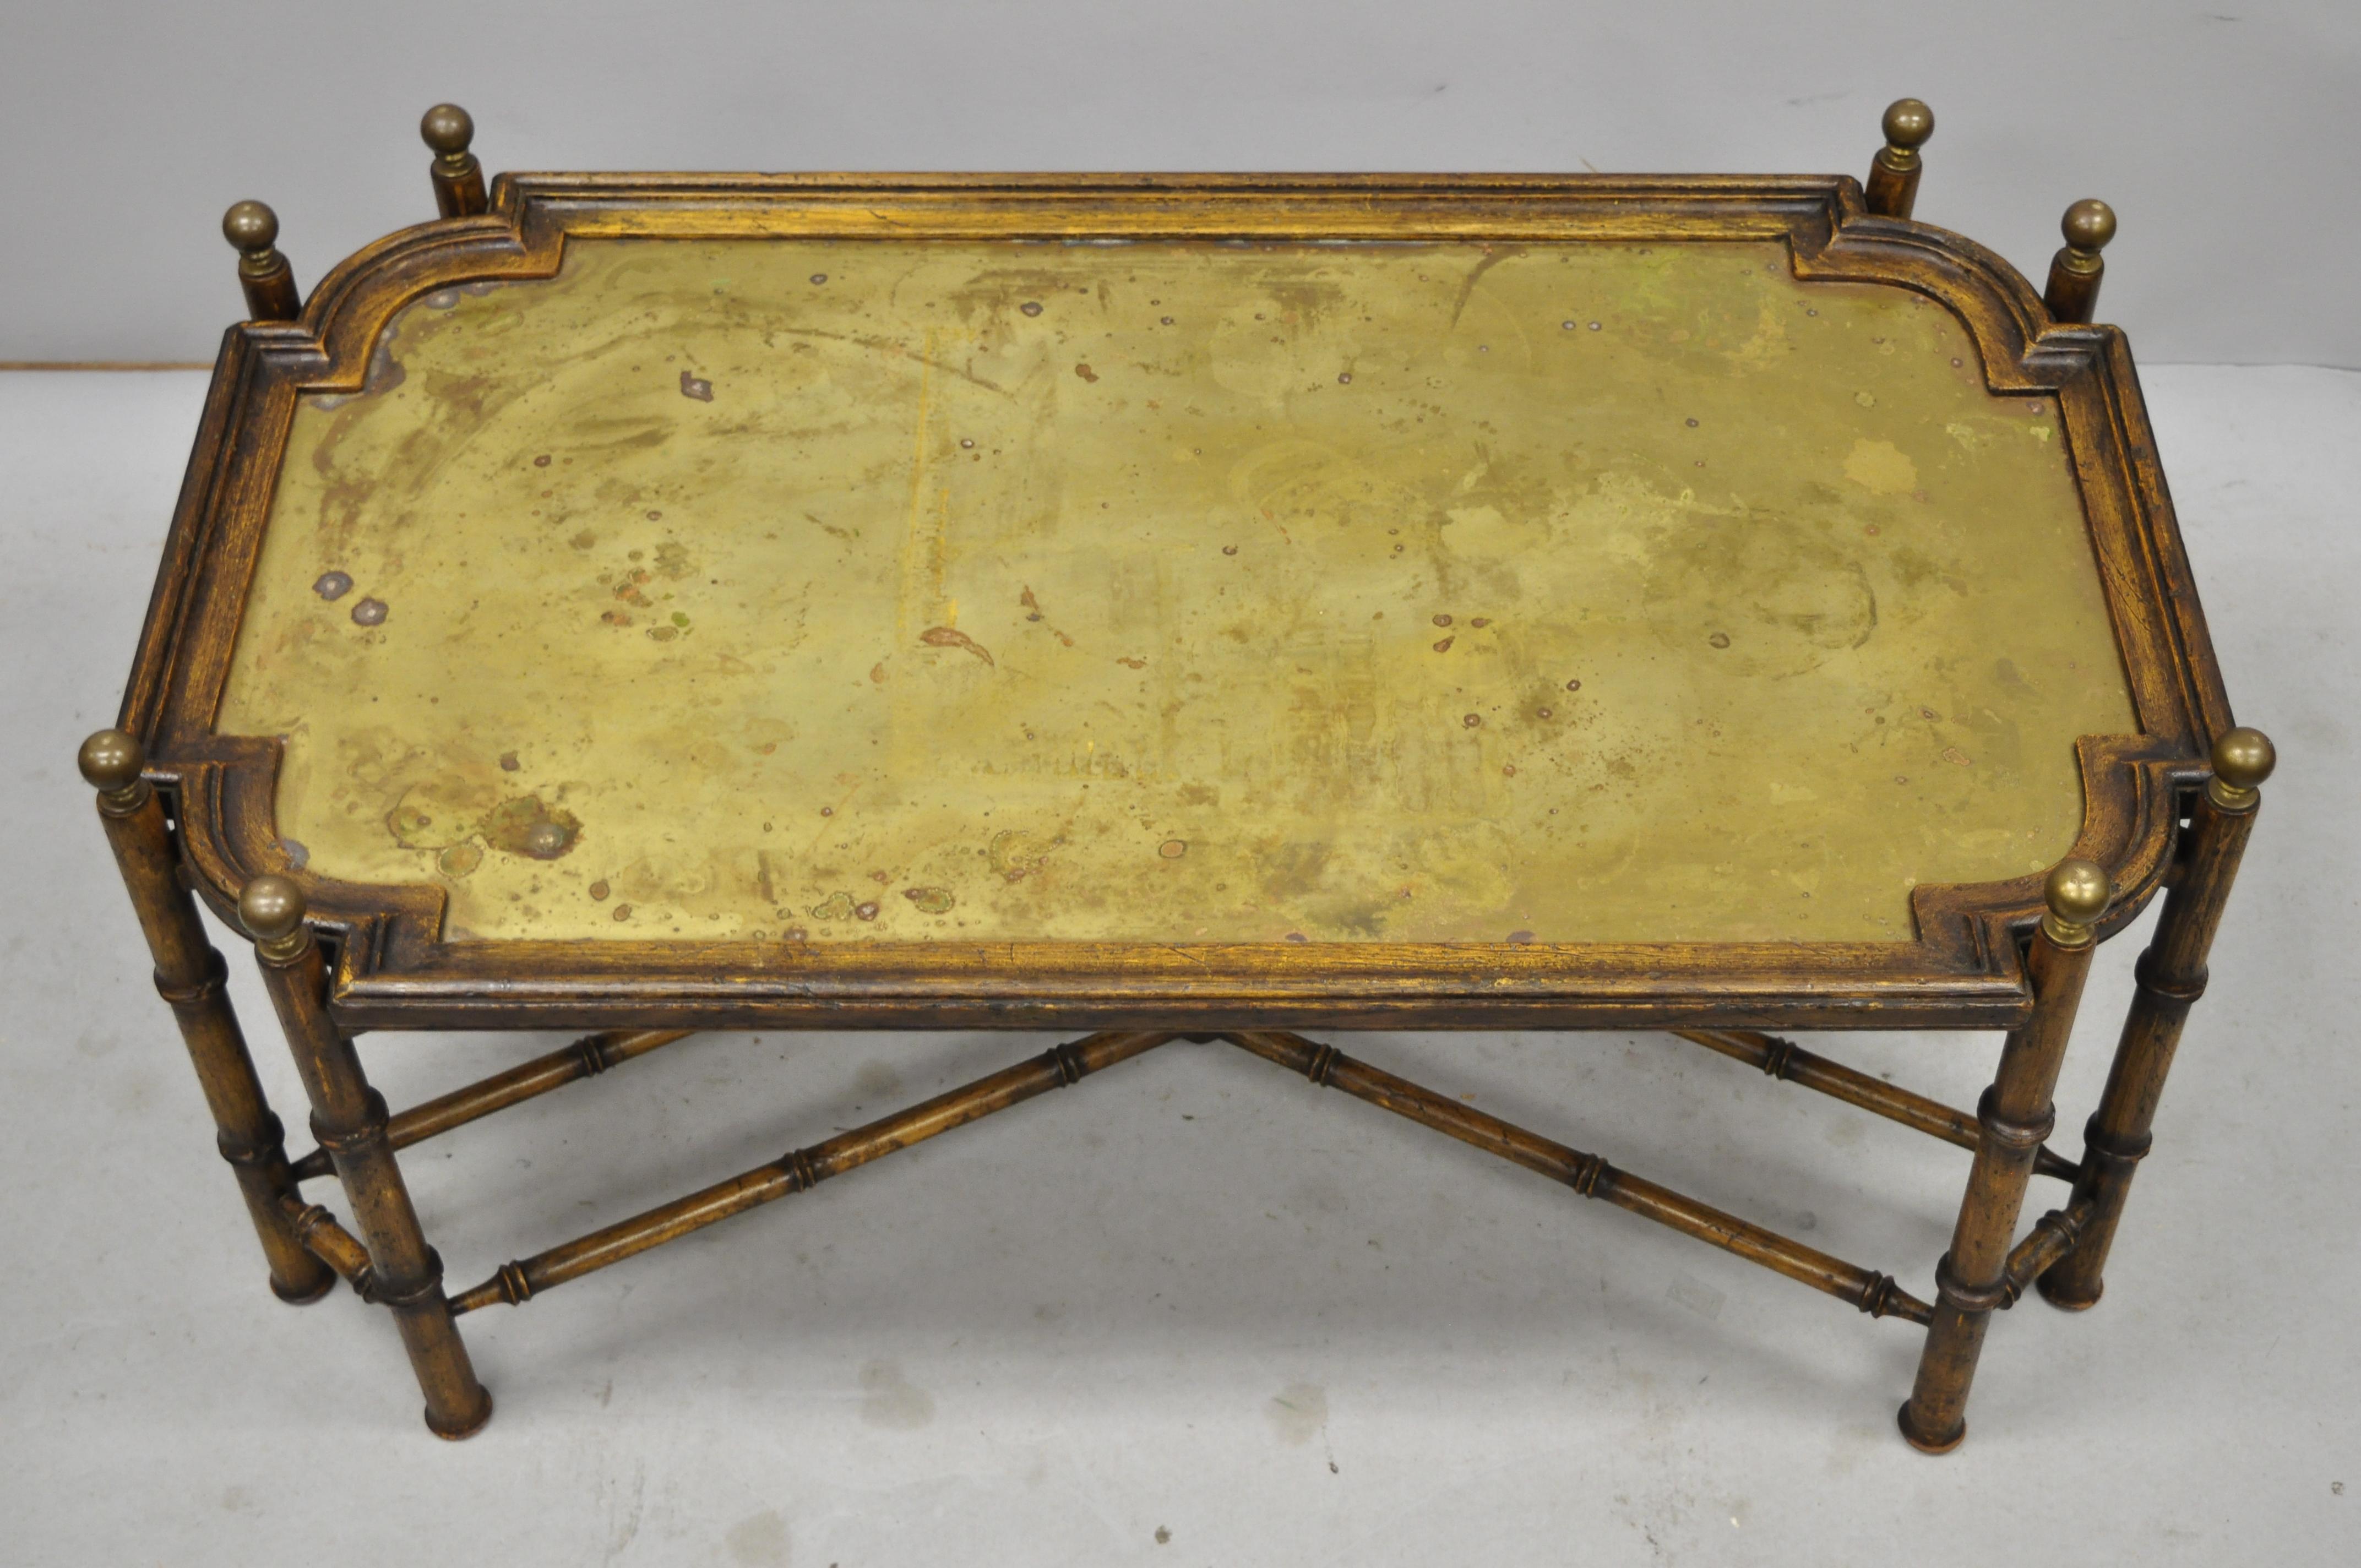 Vintage faux bamboo Chinese Chippendale style brass tray top coffee table. Item includes a faux bamboo oakwood base, removable brass tray top, brass finials, cross stretcher base, distressed finish, great style and form, circa mid-late 20th century.